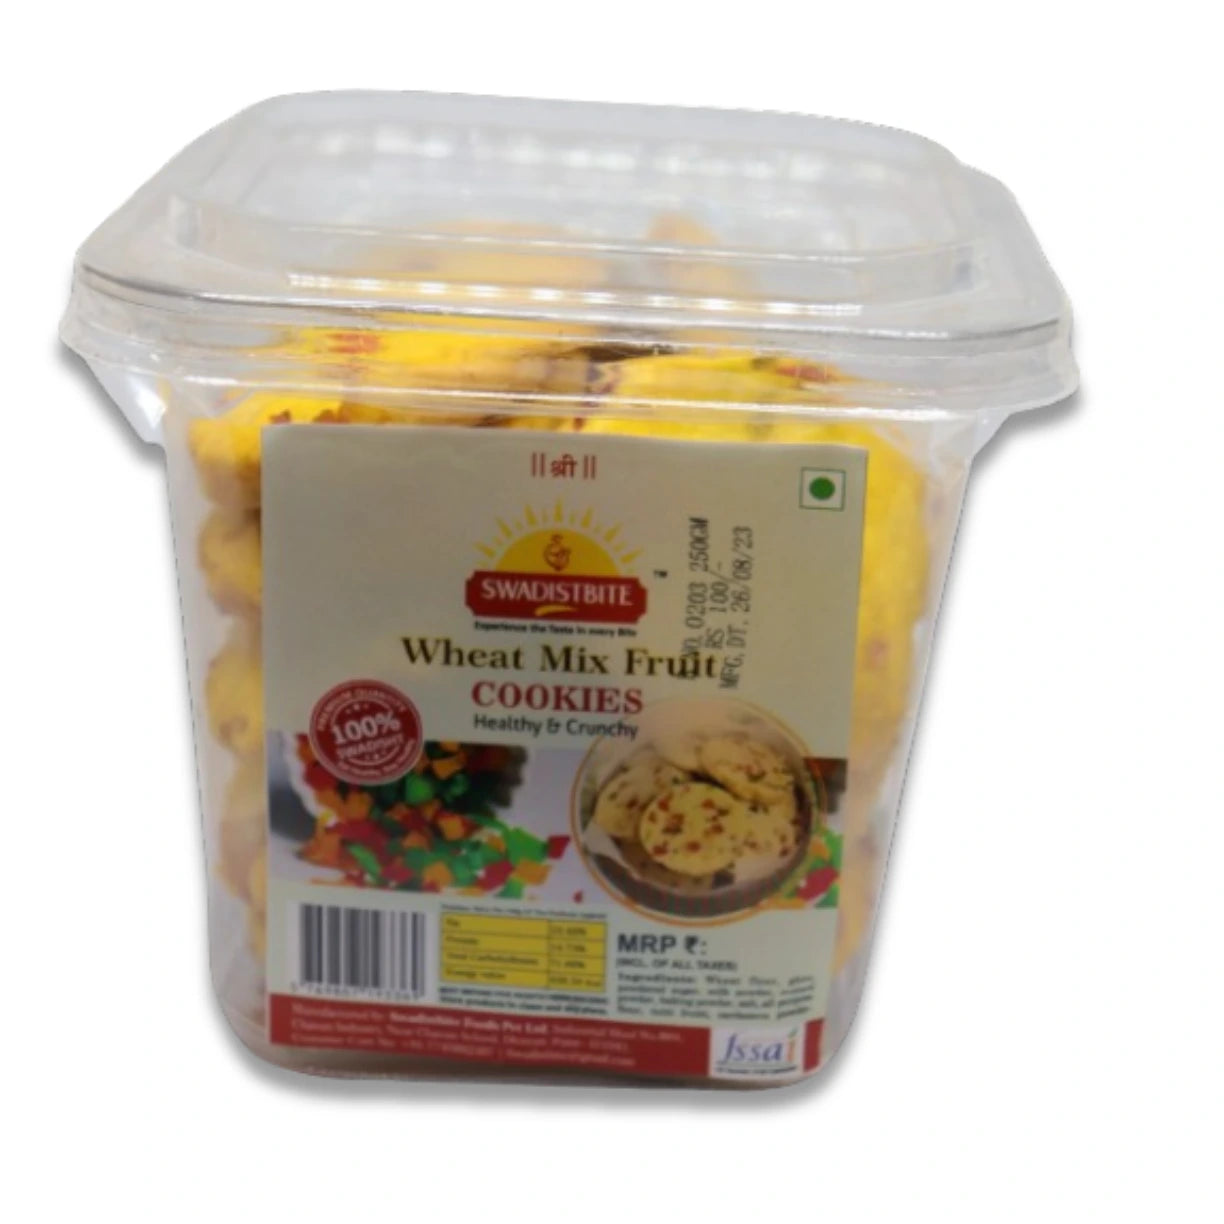 Wheat Mix Fruit Cookies |Delicious & Healthy| Eggless & 100% Natural ,Buy Online (250 Gram)